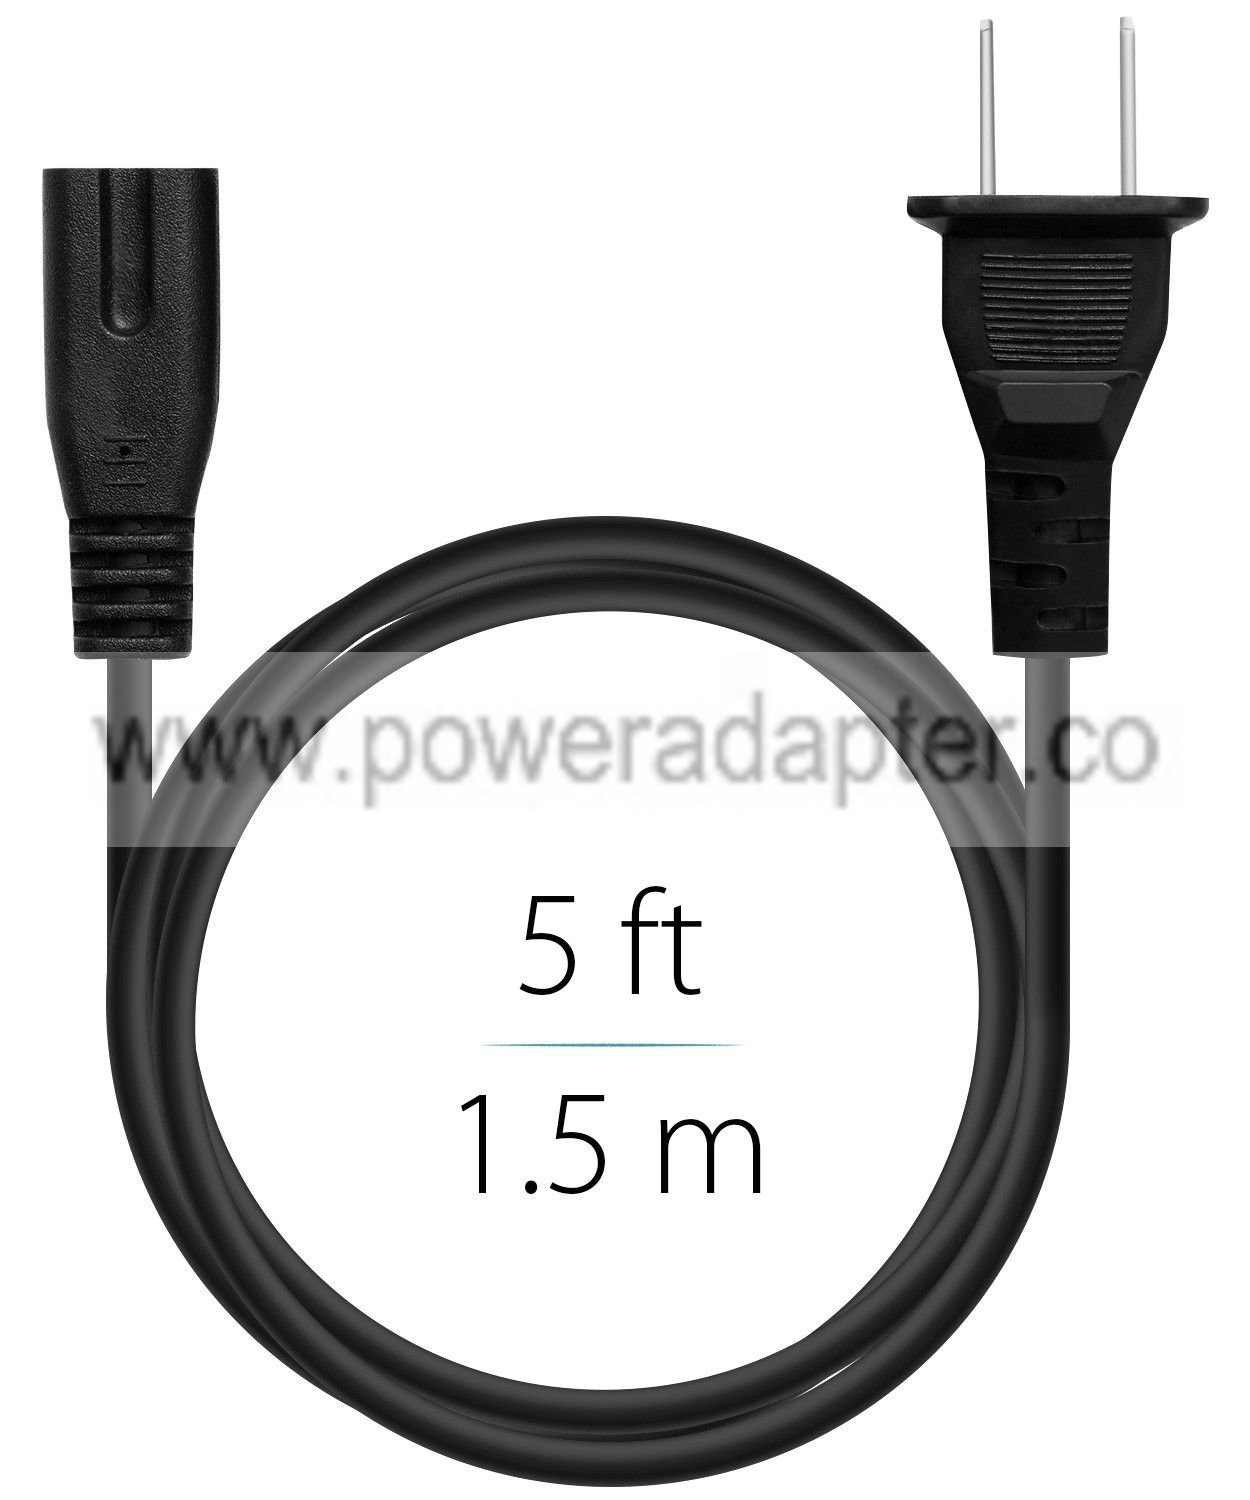 2 Prong Power Supply Cord 1.5m PS4 Xbox One X S PA-14 5FT Adapter Cable Wall Plug - Click Image to Close